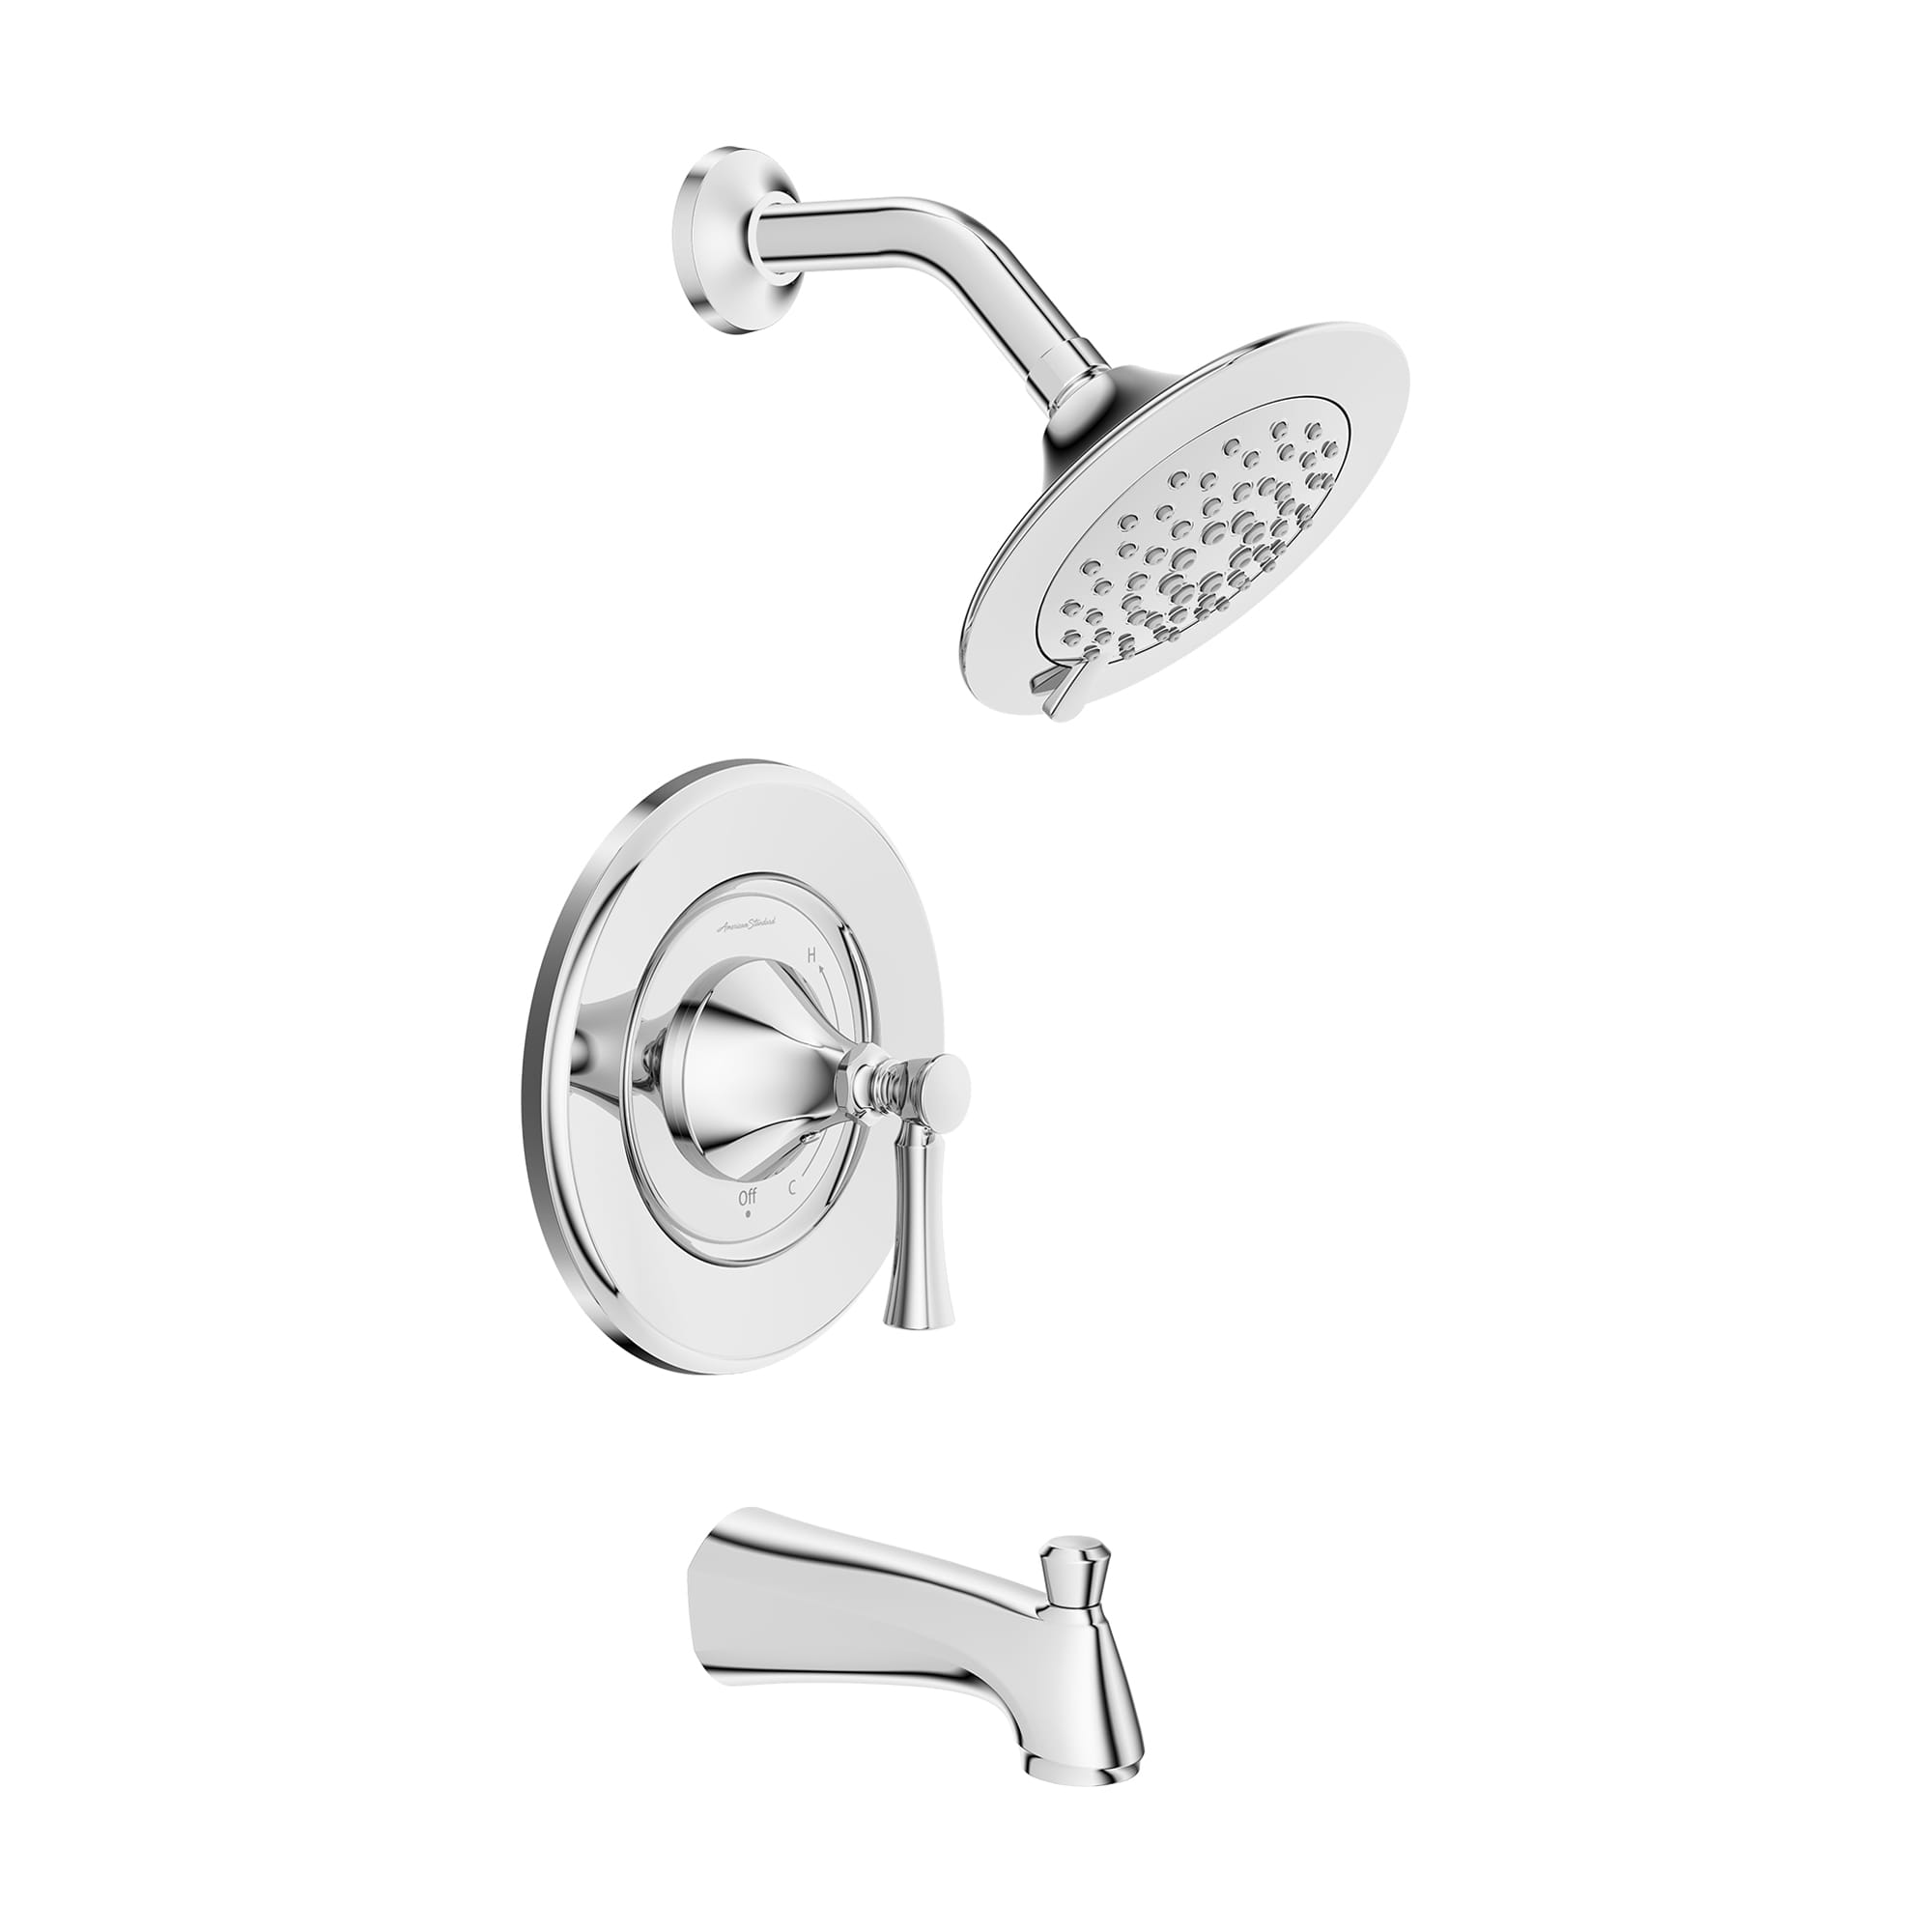 Chancellor® 1.8 gpm/6.8 L/min Tub and Shower Trim Kit With Ceramic Disc Valve Cartridge and Lever Handle